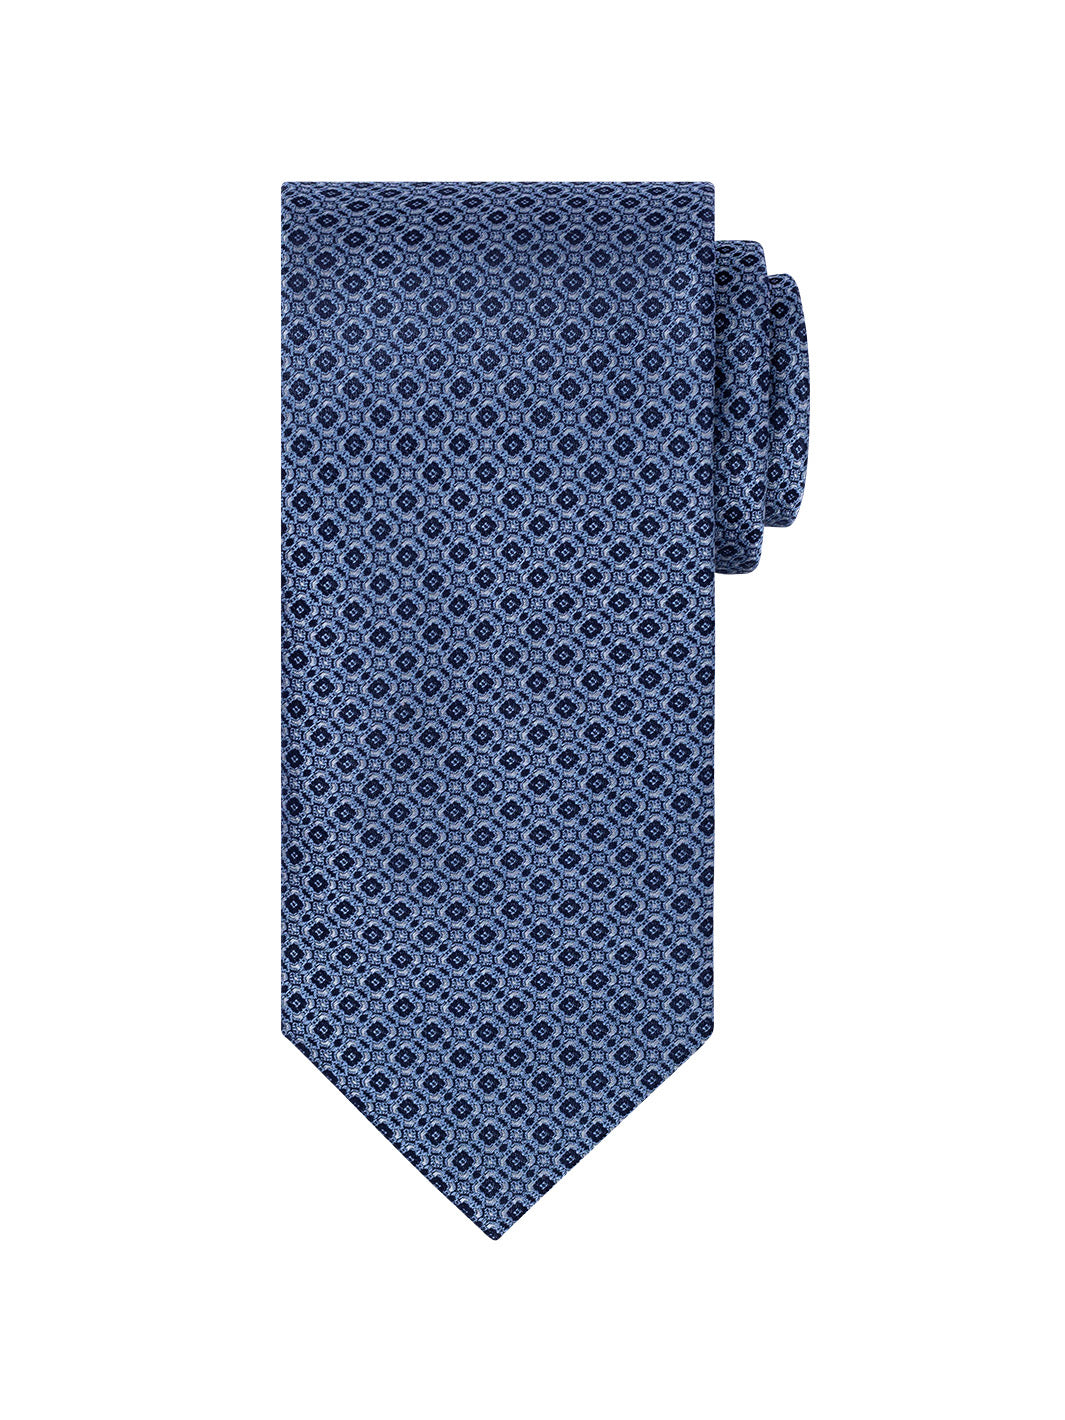 Blossom Tie in Blue